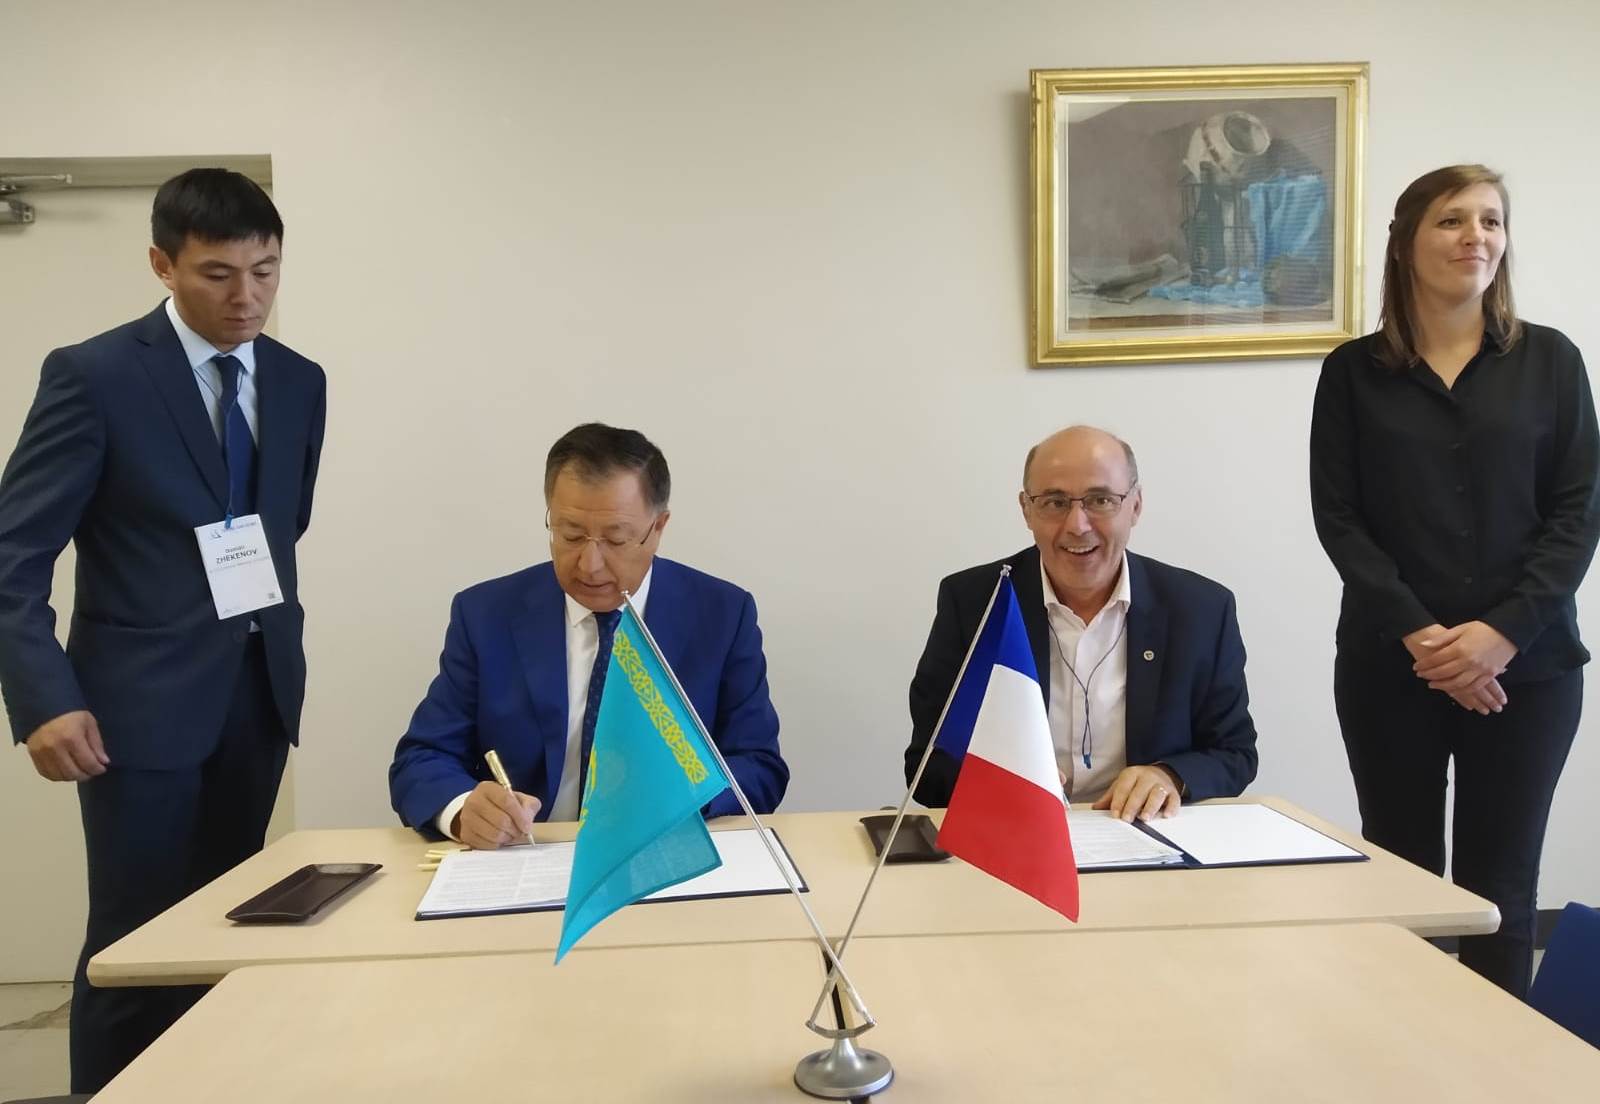 KazNU signed an agreement with the University of Grenoble-Alpes